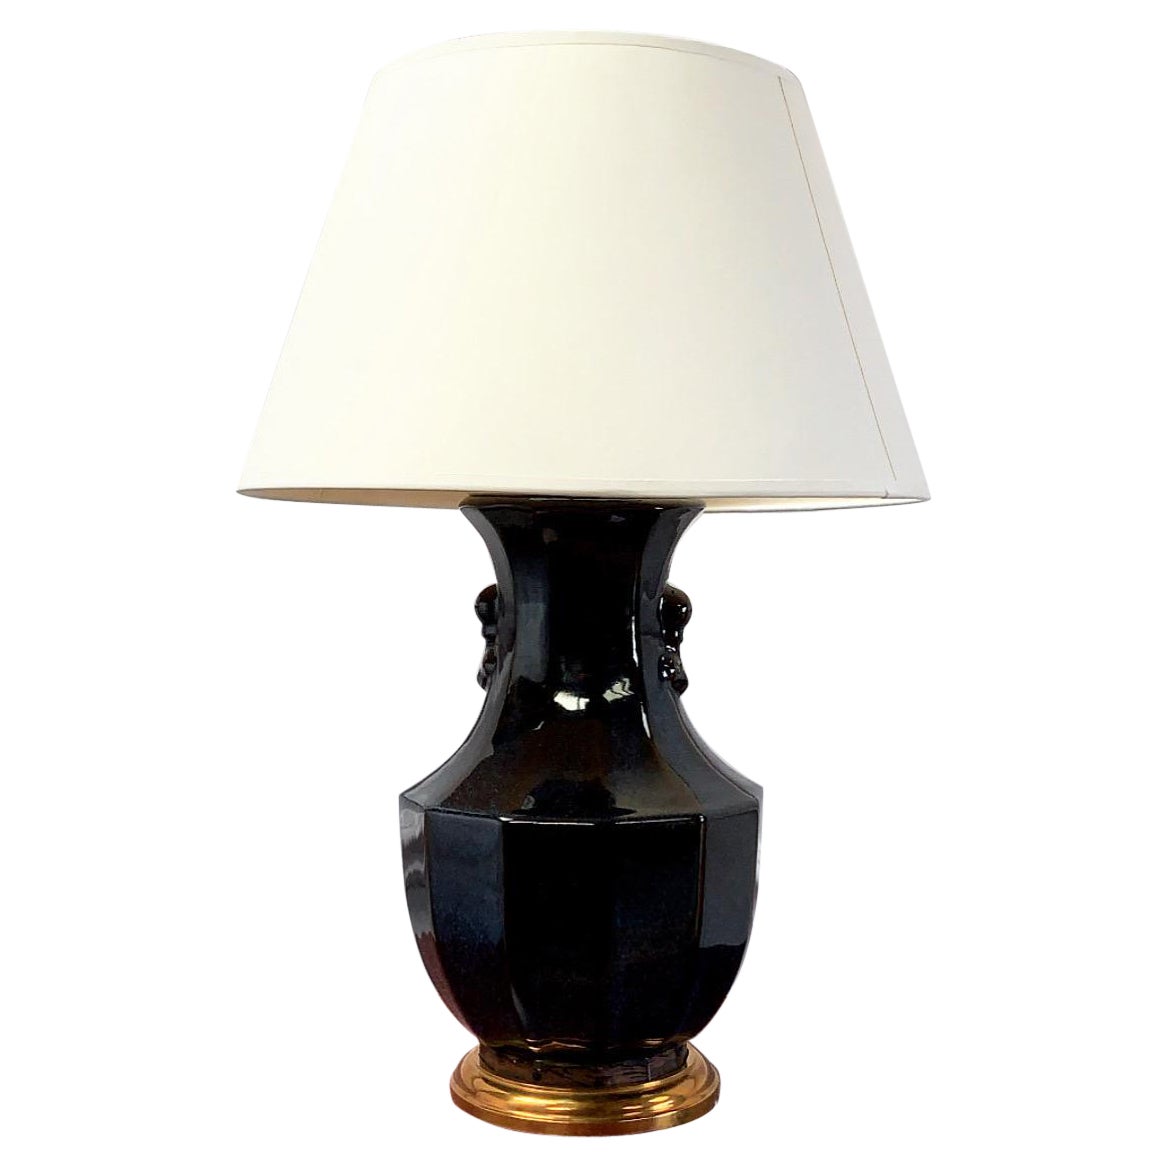 A Large Chinese Flambé Vase Now As A Lamp